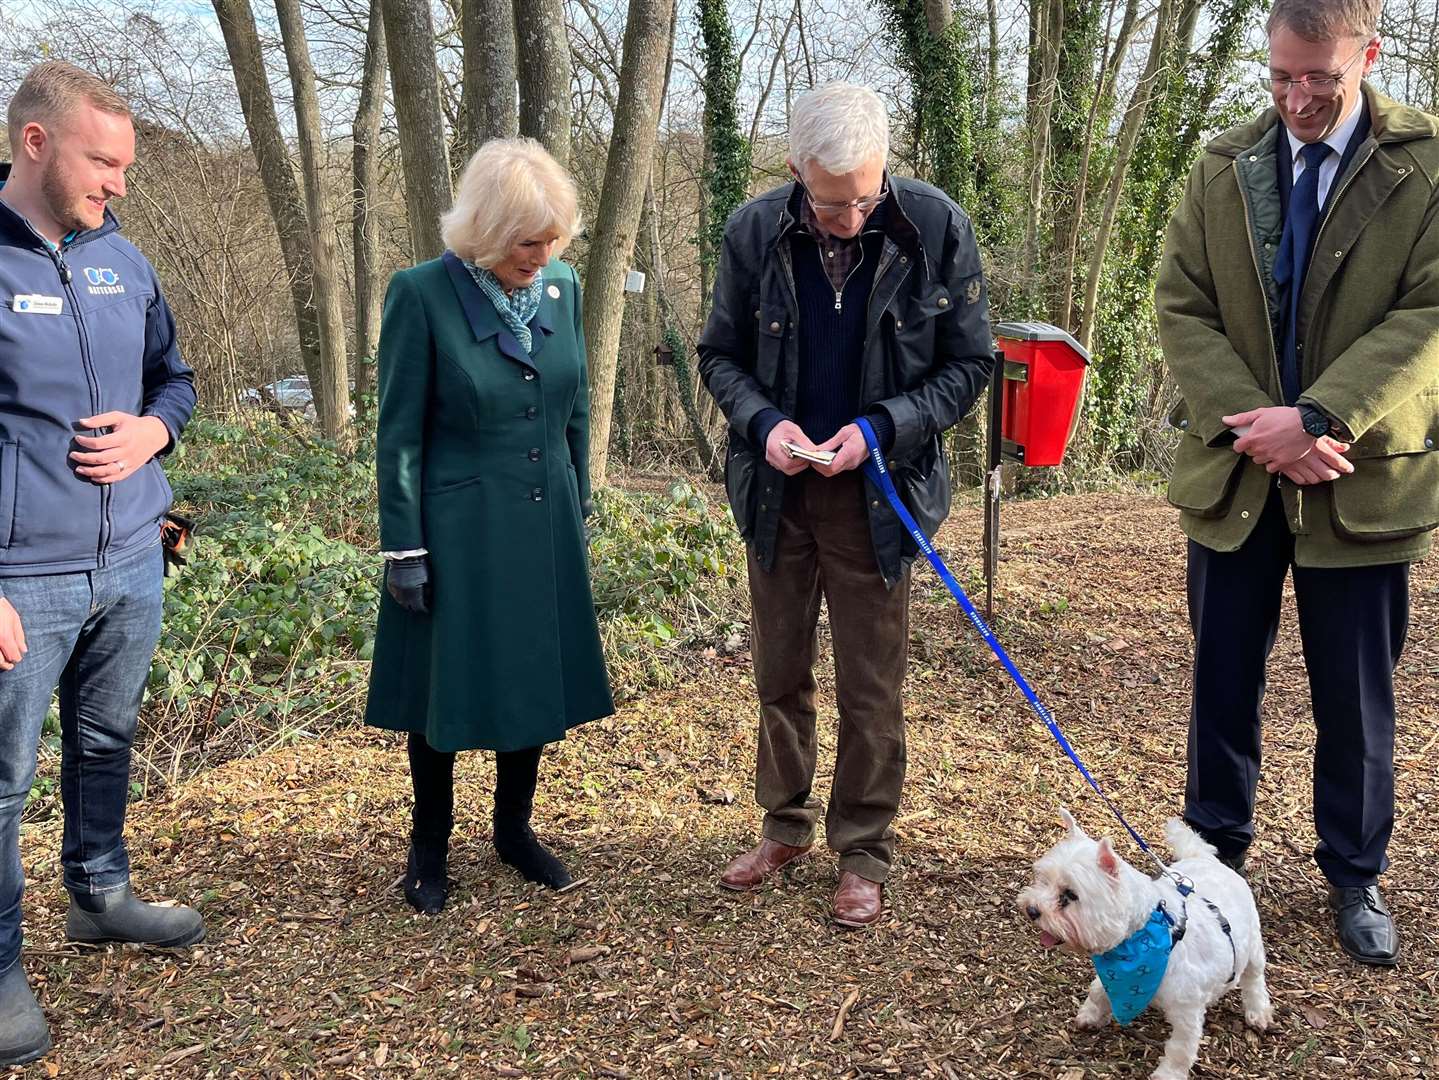 TV star Paul O' Grady showed the Duchess of Cornwall his pet dog at Battersea Dogs Home Picture: KentLive